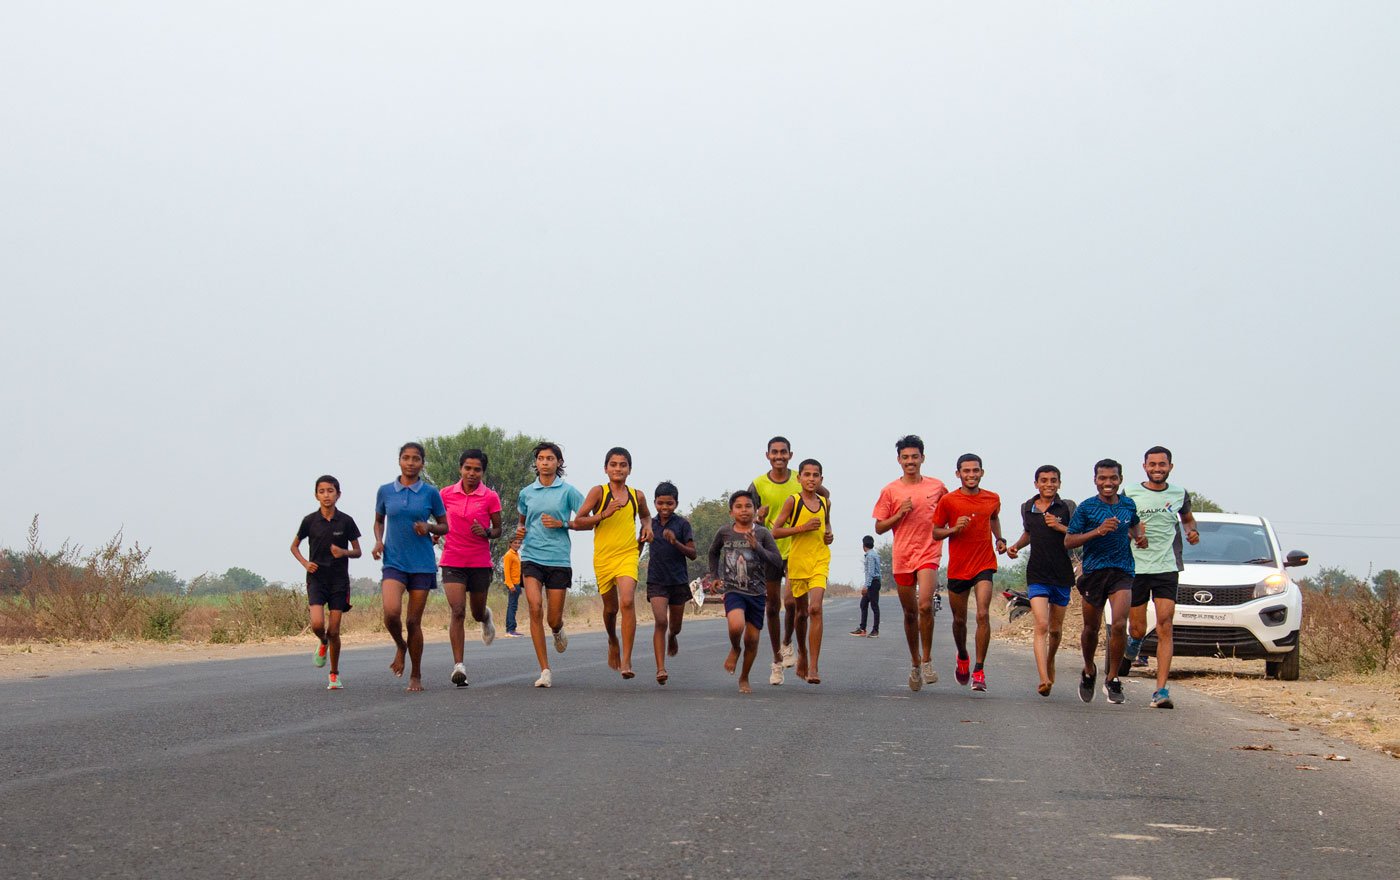 Athletes practicing on the Beed bypass road. 'This road is not that busy but while running we still have to be careful of vehicles passing by,' says coach Ravi